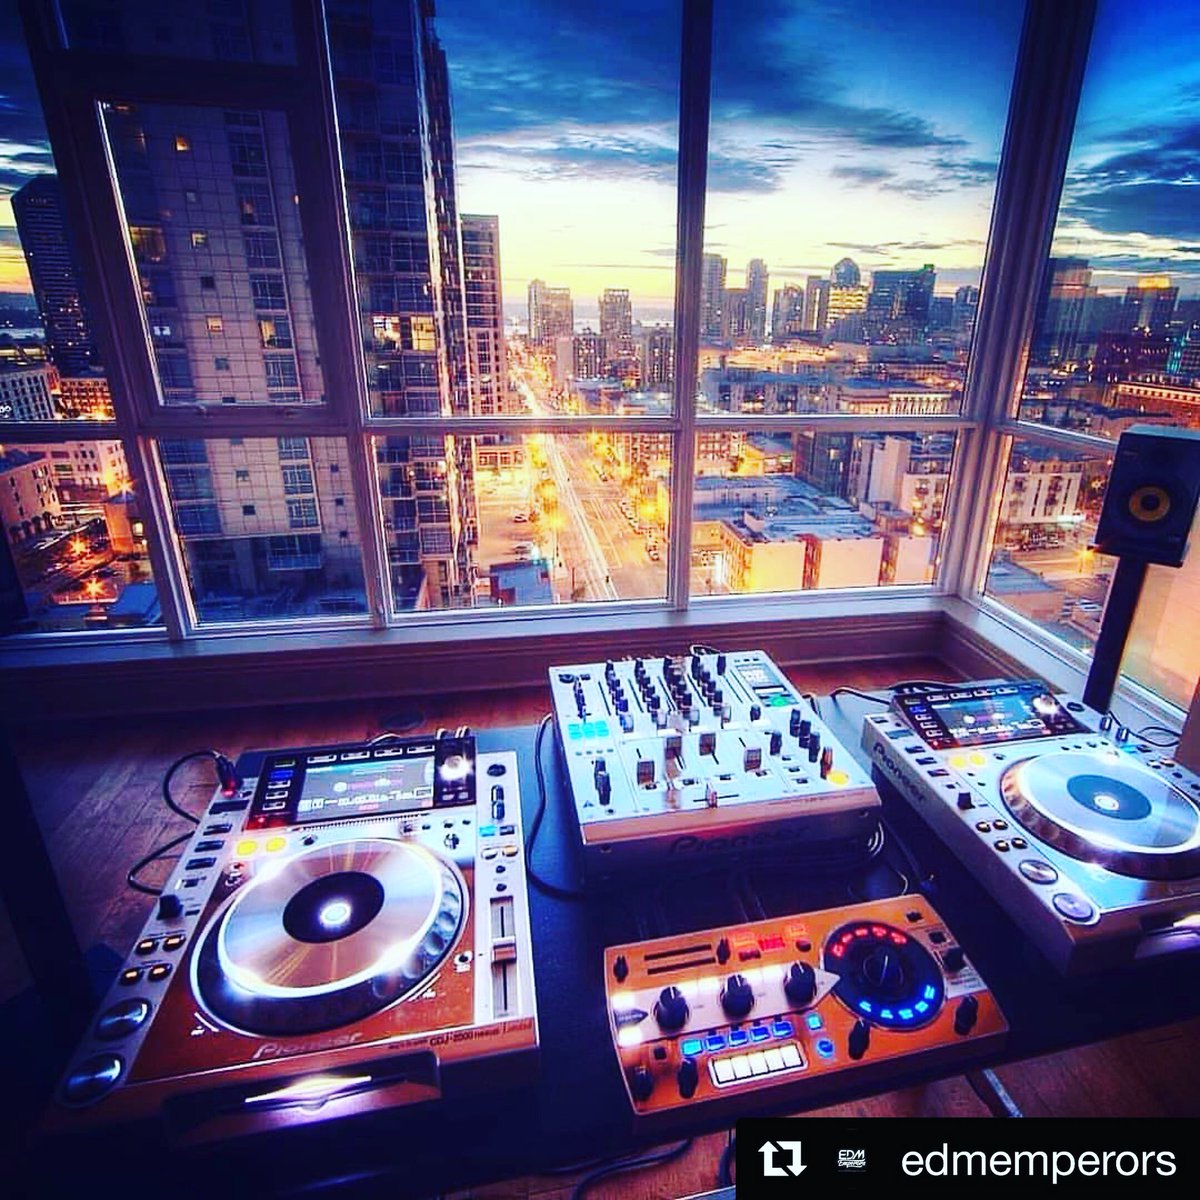 #BIZBoost Awesomeness @EDMemperors 😎🎵🎶🔥🚀
・・・
Perfect place with an excellent view to inspire making a new set! 👀🎶🔥 What do you think?

#pioneerdj #edmstudio #producerstudio #edm #futurehouse #dubstep #techno #deephouse #plurvibes #housemusic #dancemusic #edmlifestyle